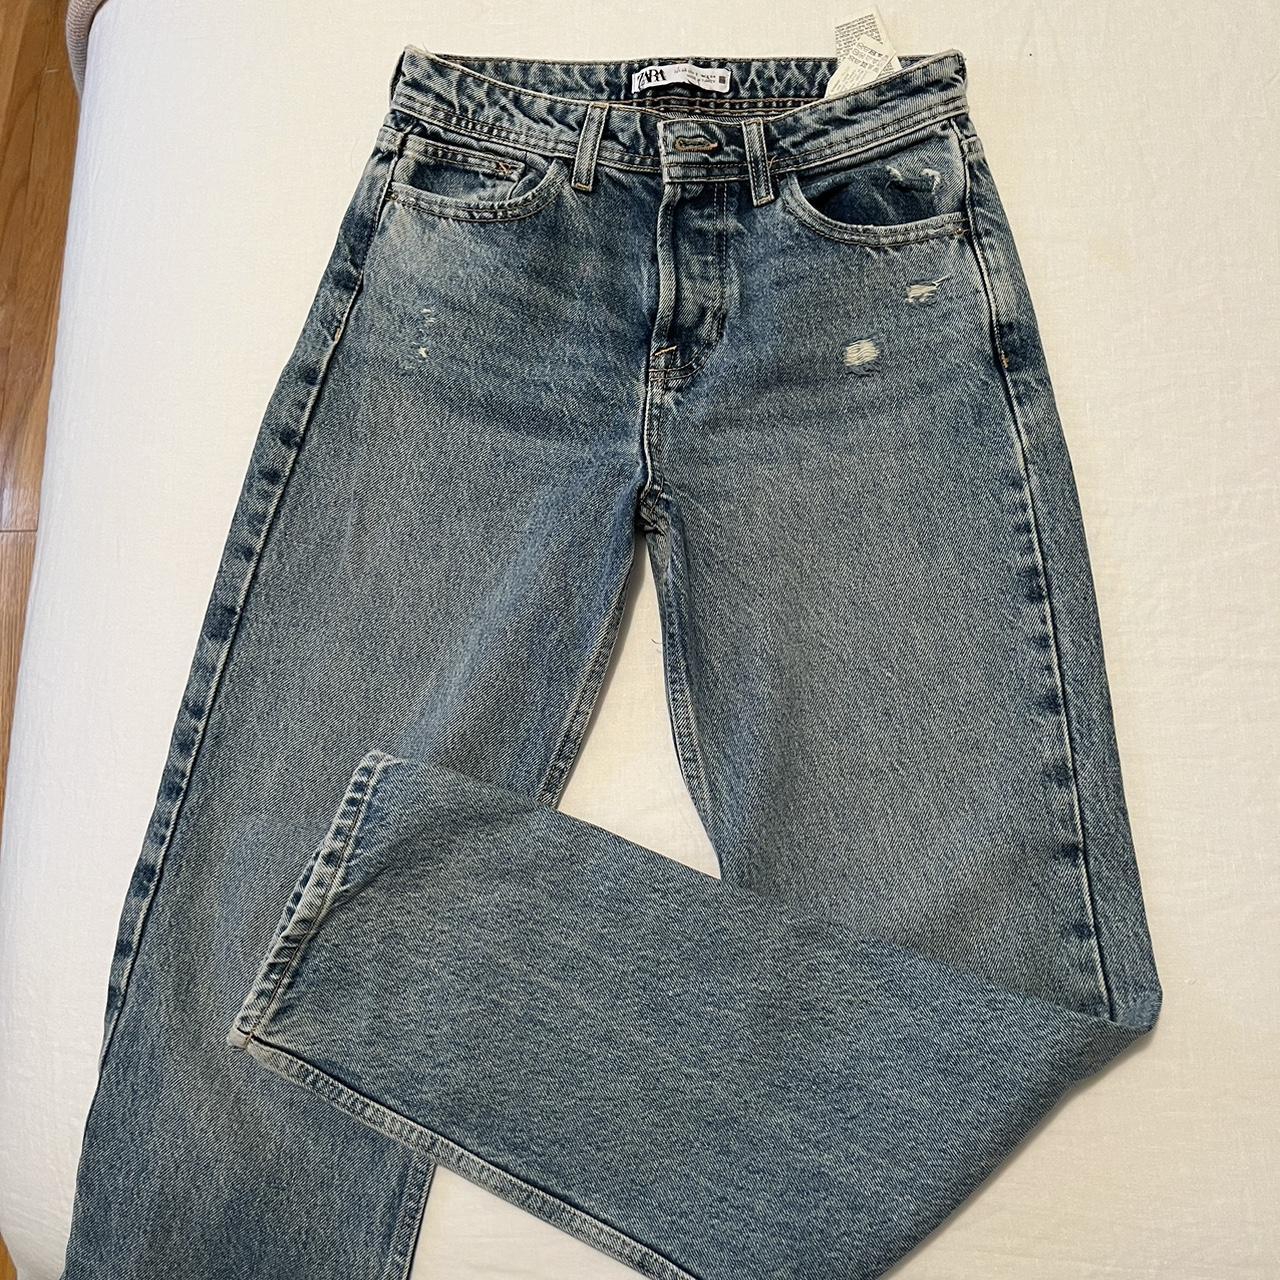 NWT Zara mid rise baggy jeans!! They are super... - Depop